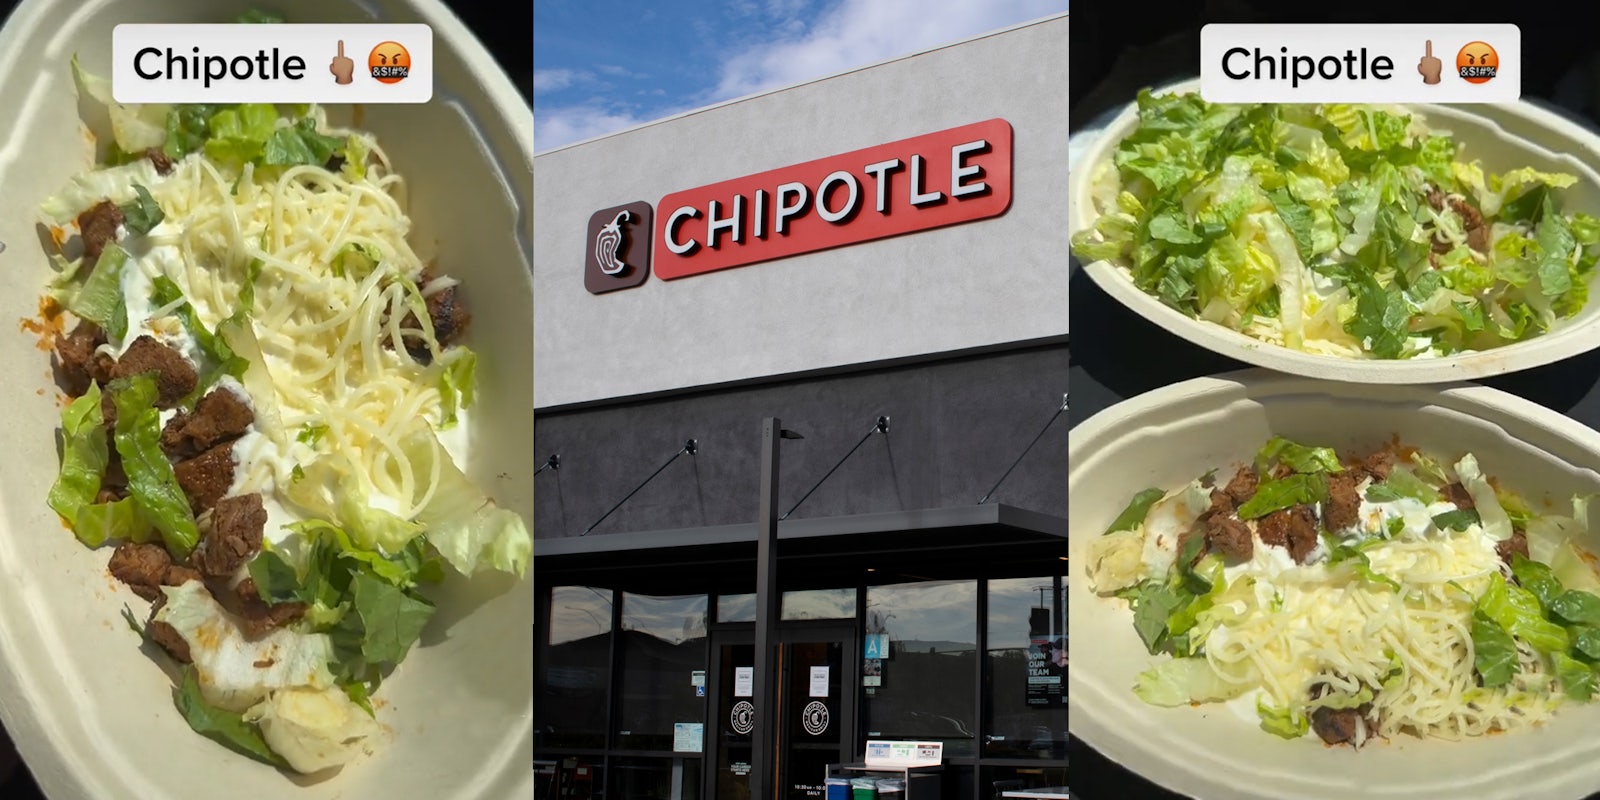 Chipotle food in bowl with caption 'Chipotle' (l) Chipotle sign on building (c) Chipotle food in bowls with caption 'Chipotle' (r)